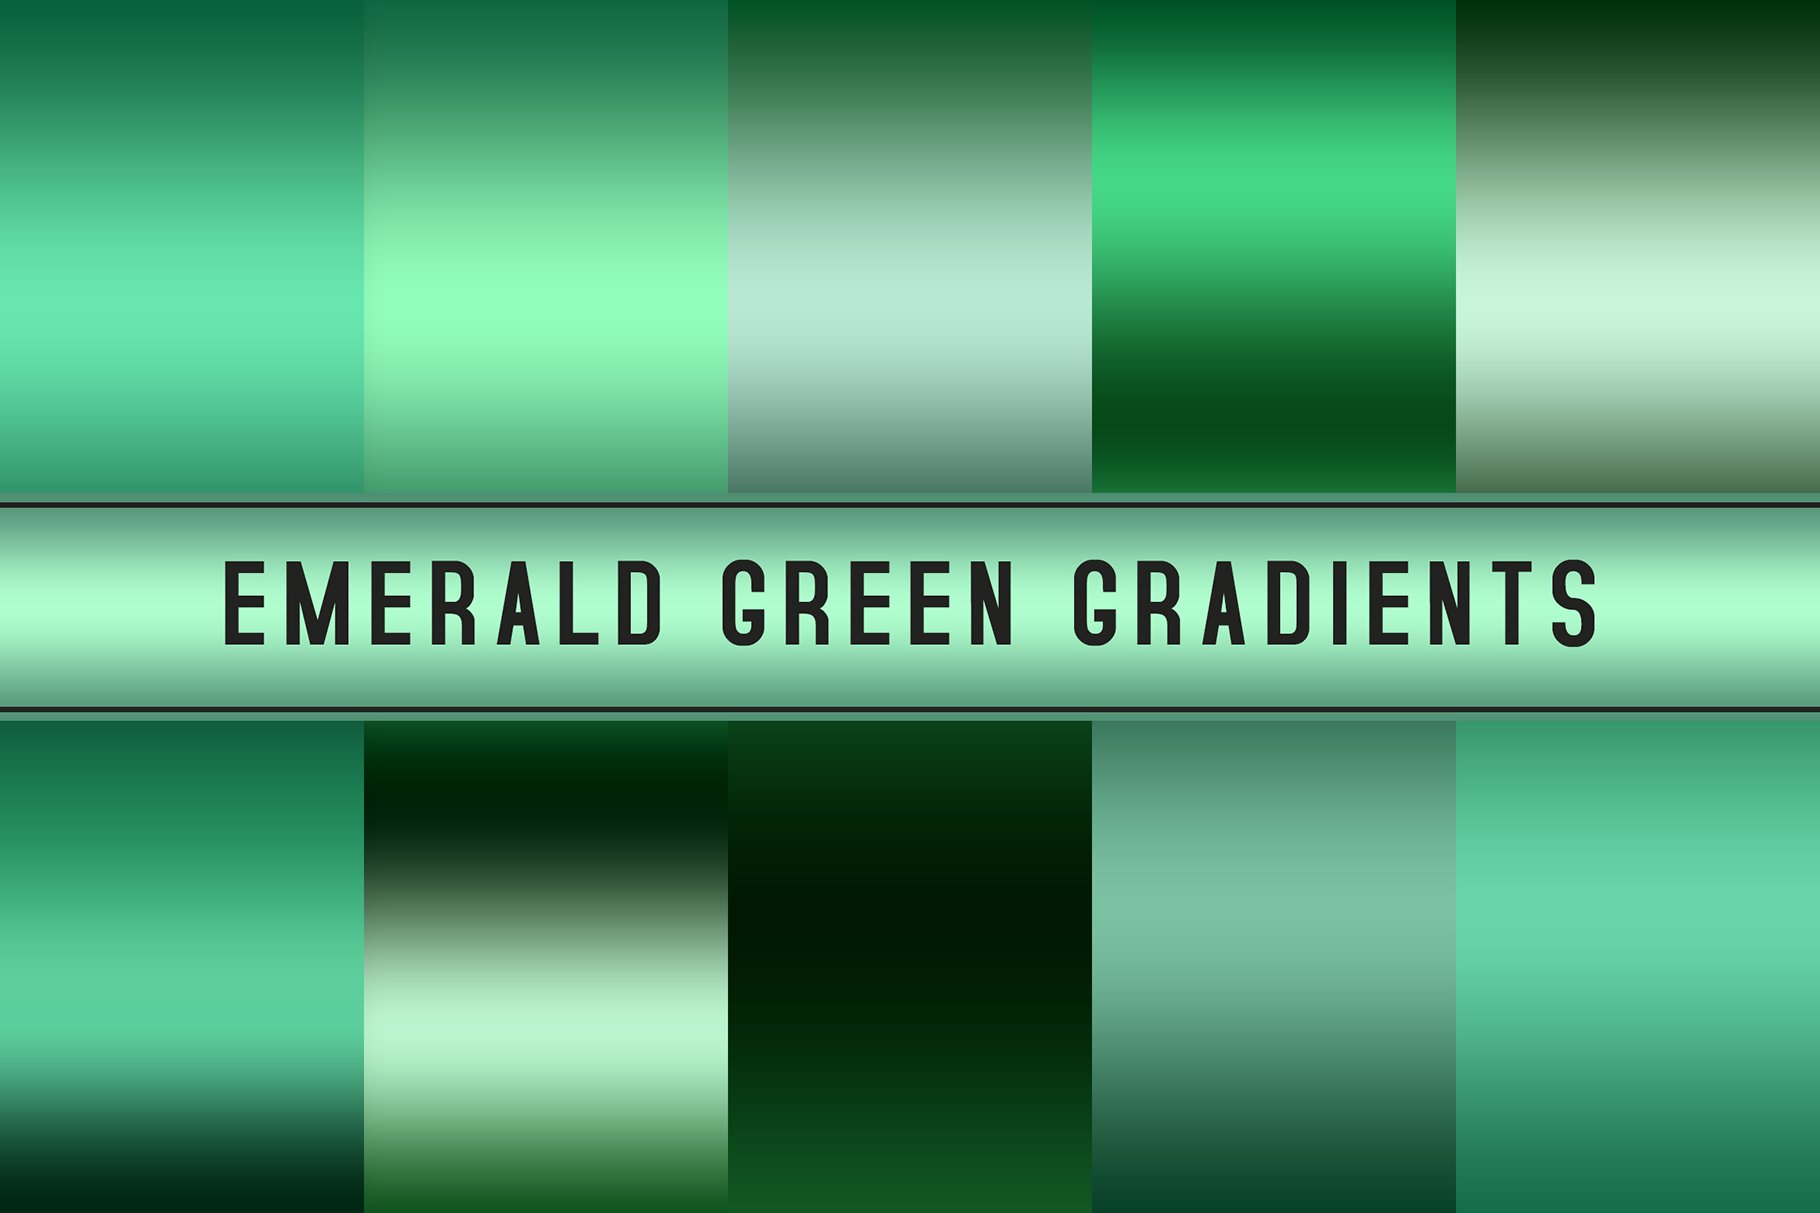 Emerald Green Gradients cover image.